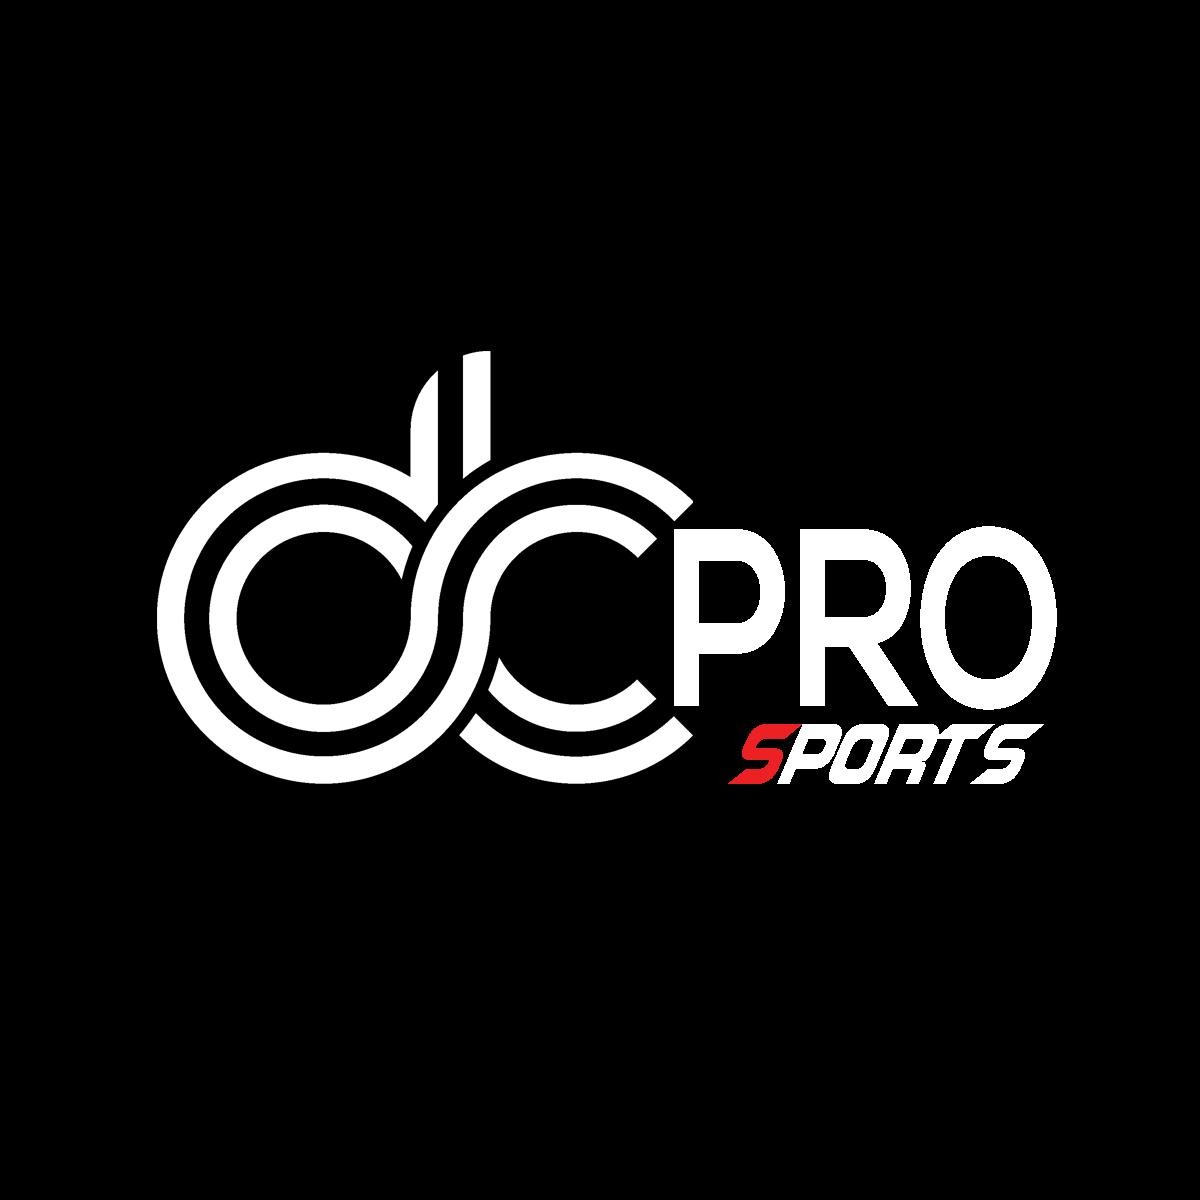 Shop online with DCPRO SPORTS now! Visit DCPRO SPORTS on Lazada.